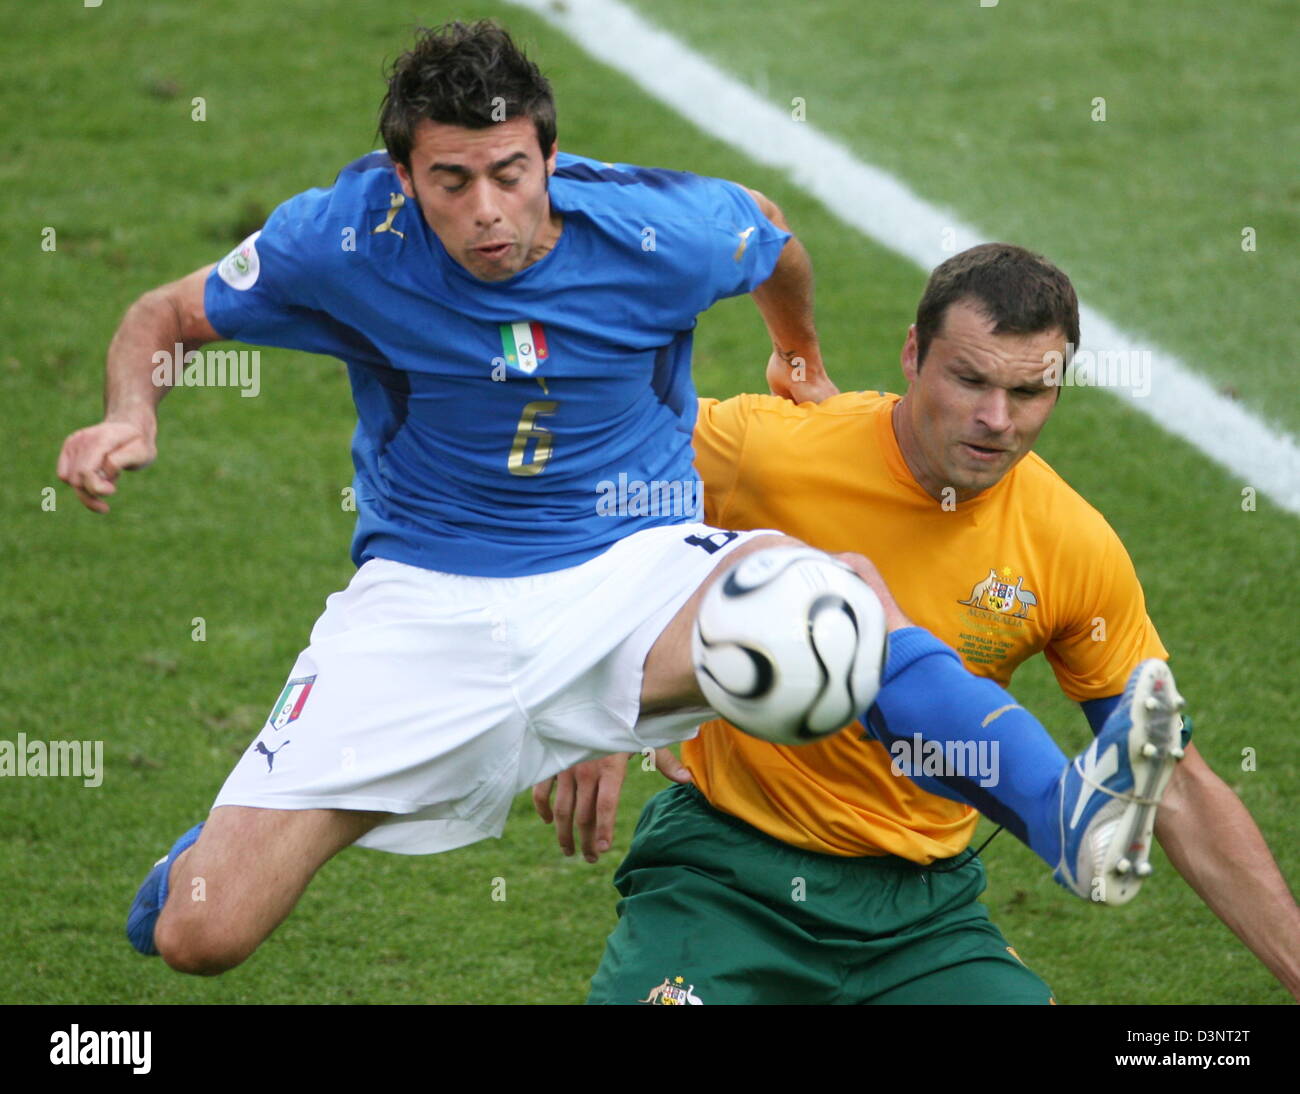 Andrea Barzagli (L) of Italy vies with Mark Viduka of Australia during the 2nd round match of the 2006 FIFA World Cup between Italy and Australia in Kaiserslautern, Germany, Monday, 26 June 2006. Photo: ULI DECK +++ Mobile Services OUT +++ Please refer to FIFA's terms and conditions Stock Photo